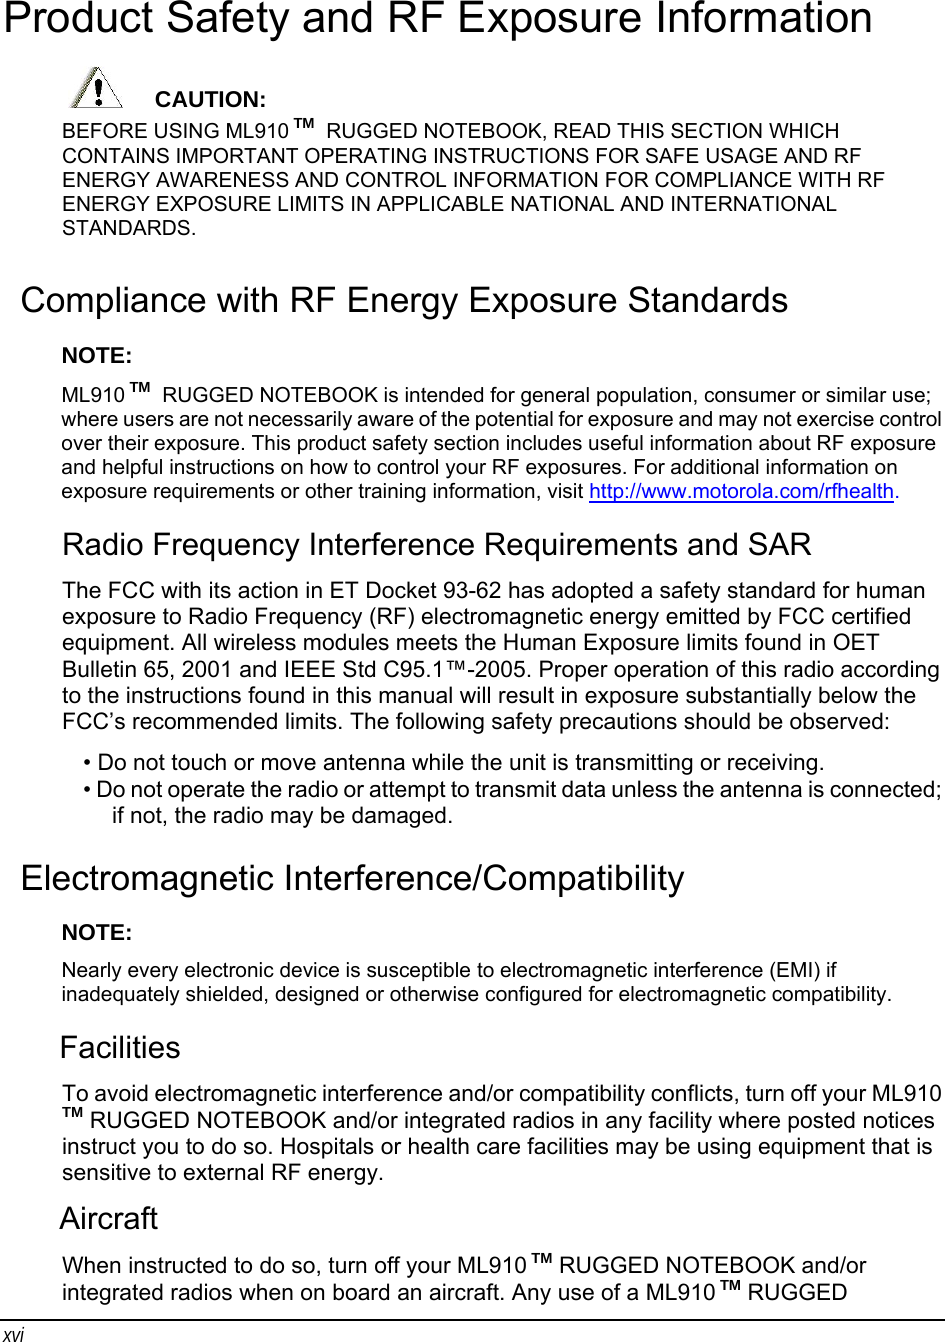 xvi Product Safety and RF Exposure Information      CAUTION: BEFORE USING ML910 TM  RUGGED NOTEBOOK, READ THIS SECTION WHICH CONTAINS IMPORTANT OPERATING INSTRUCTIONS FOR SAFE USAGE AND RF ENERGY AWARENESS AND CONTROL INFORMATION FOR COMPLIANCE WITH RF ENERGY EXPOSURE LIMITS IN APPLICABLE NATIONAL AND INTERNATIONAL STANDARDS. Compliance with RF Energy Exposure Standards NOTE:  ML910 TM  RUGGED NOTEBOOK is intended for general population, consumer or similar use; where users are not necessarily aware of the potential for exposure and may not exercise control over their exposure. This product safety section includes useful information about RF exposure and helpful instructions on how to control your RF exposures. For additional information on exposure requirements or other training information, visit http://www.motorola.com/rfhealth. Radio Frequency Interference Requirements and SAR The FCC with its action in ET Docket 93-62 has adopted a safety standard for human exposure to Radio Frequency (RF) electromagnetic energy emitted by FCC certified equipment. All wireless modules meets the Human Exposure limits found in OET Bulletin 65, 2001 and IEEE Std C95.1™-2005. Proper operation of this radio according to the instructions found in this manual will result in exposure substantially below the FCC’s recommended limits. The following safety precautions should be observed: • Do not touch or move antenna while the unit is transmitting or receiving. • Do not operate the radio or attempt to transmit data unless the antenna is connected; if not, the radio may be damaged. Electromagnetic Interference/Compatibility NOTE:  Nearly every electronic device is susceptible to electromagnetic interference (EMI) if inadequately shielded, designed or otherwise configured for electromagnetic compatibility. Facilities To avoid electromagnetic interference and/or compatibility conflicts, turn off your ML910 TM RUGGED NOTEBOOK and/or integrated radios in any facility where posted notices instruct you to do so. Hospitals or health care facilities may be using equipment that is sensitive to external RF energy. Aircraft When instructed to do so, turn off your ML910 TM RUGGED NOTEBOOK and/or integrated radios when on board an aircraft. Any use of a ML910 TM RUGGED 